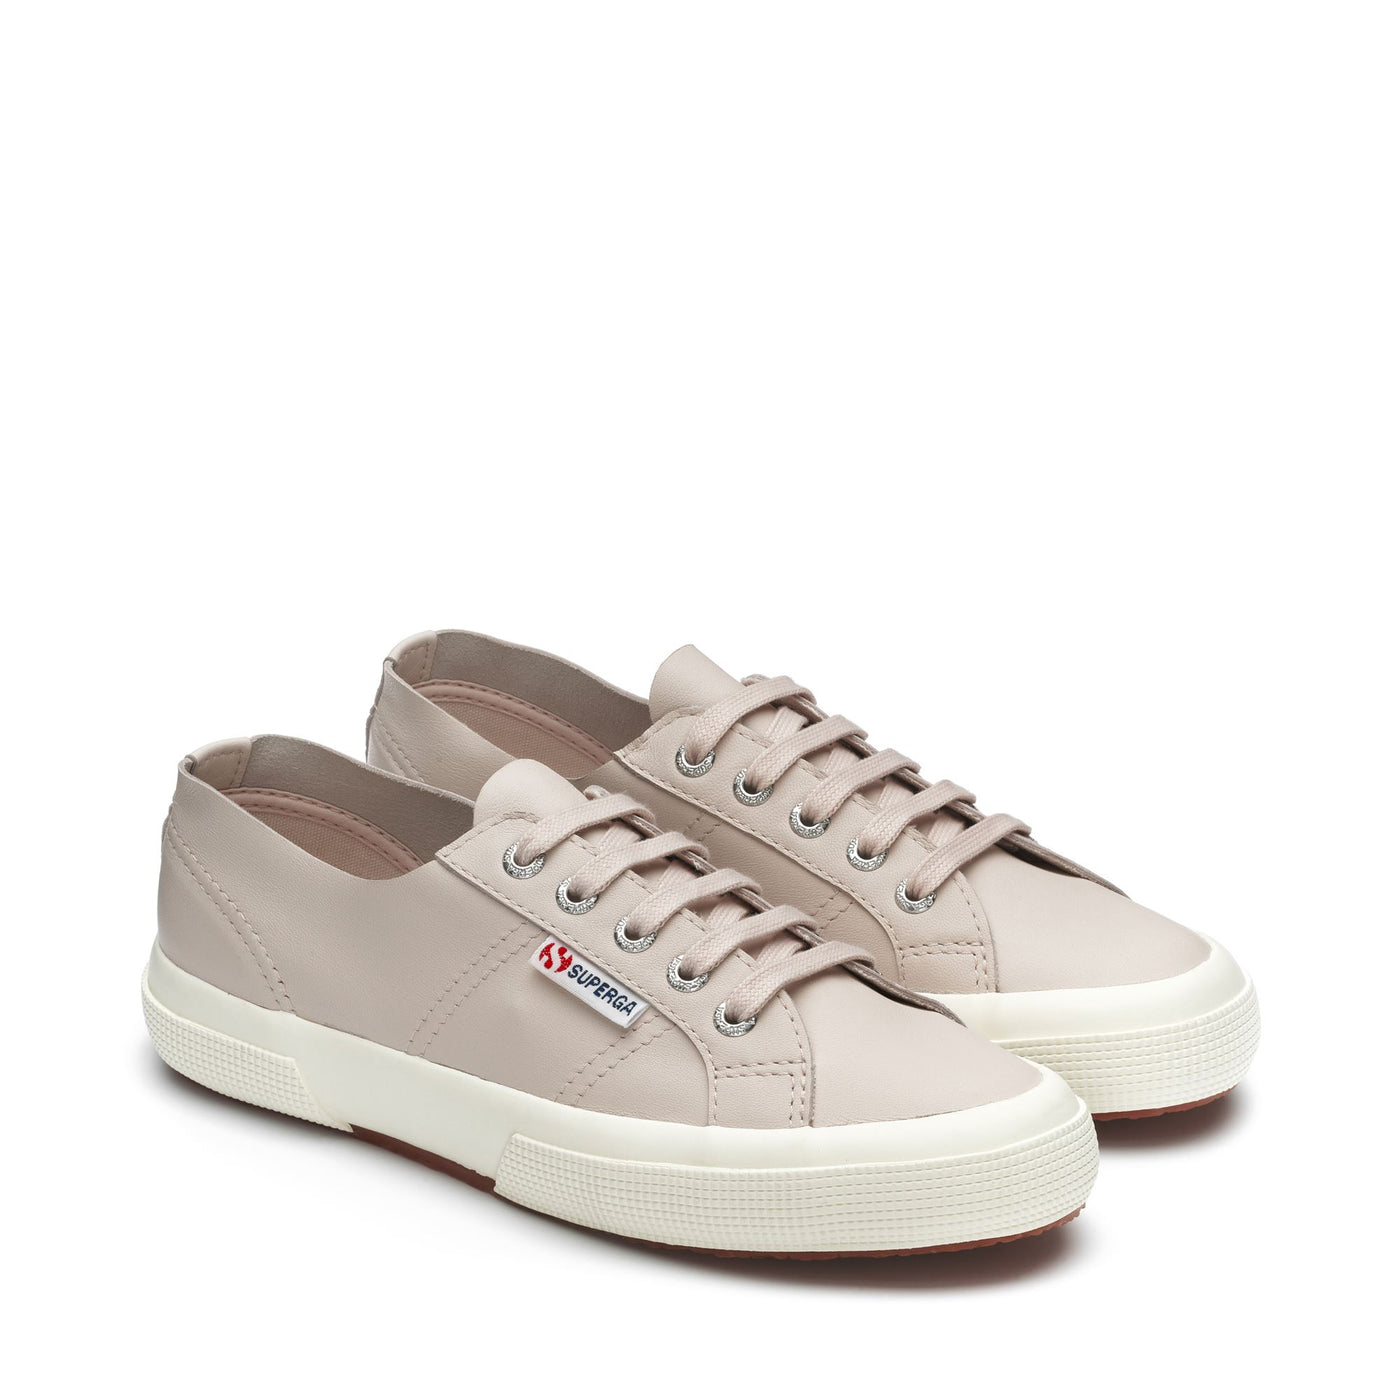 Le Superga Woman 2750 UNLINED NAPPA Sneaker PINK ALMOND-SILVER-FAVORIO Dressed Front (jpg Rgb)	